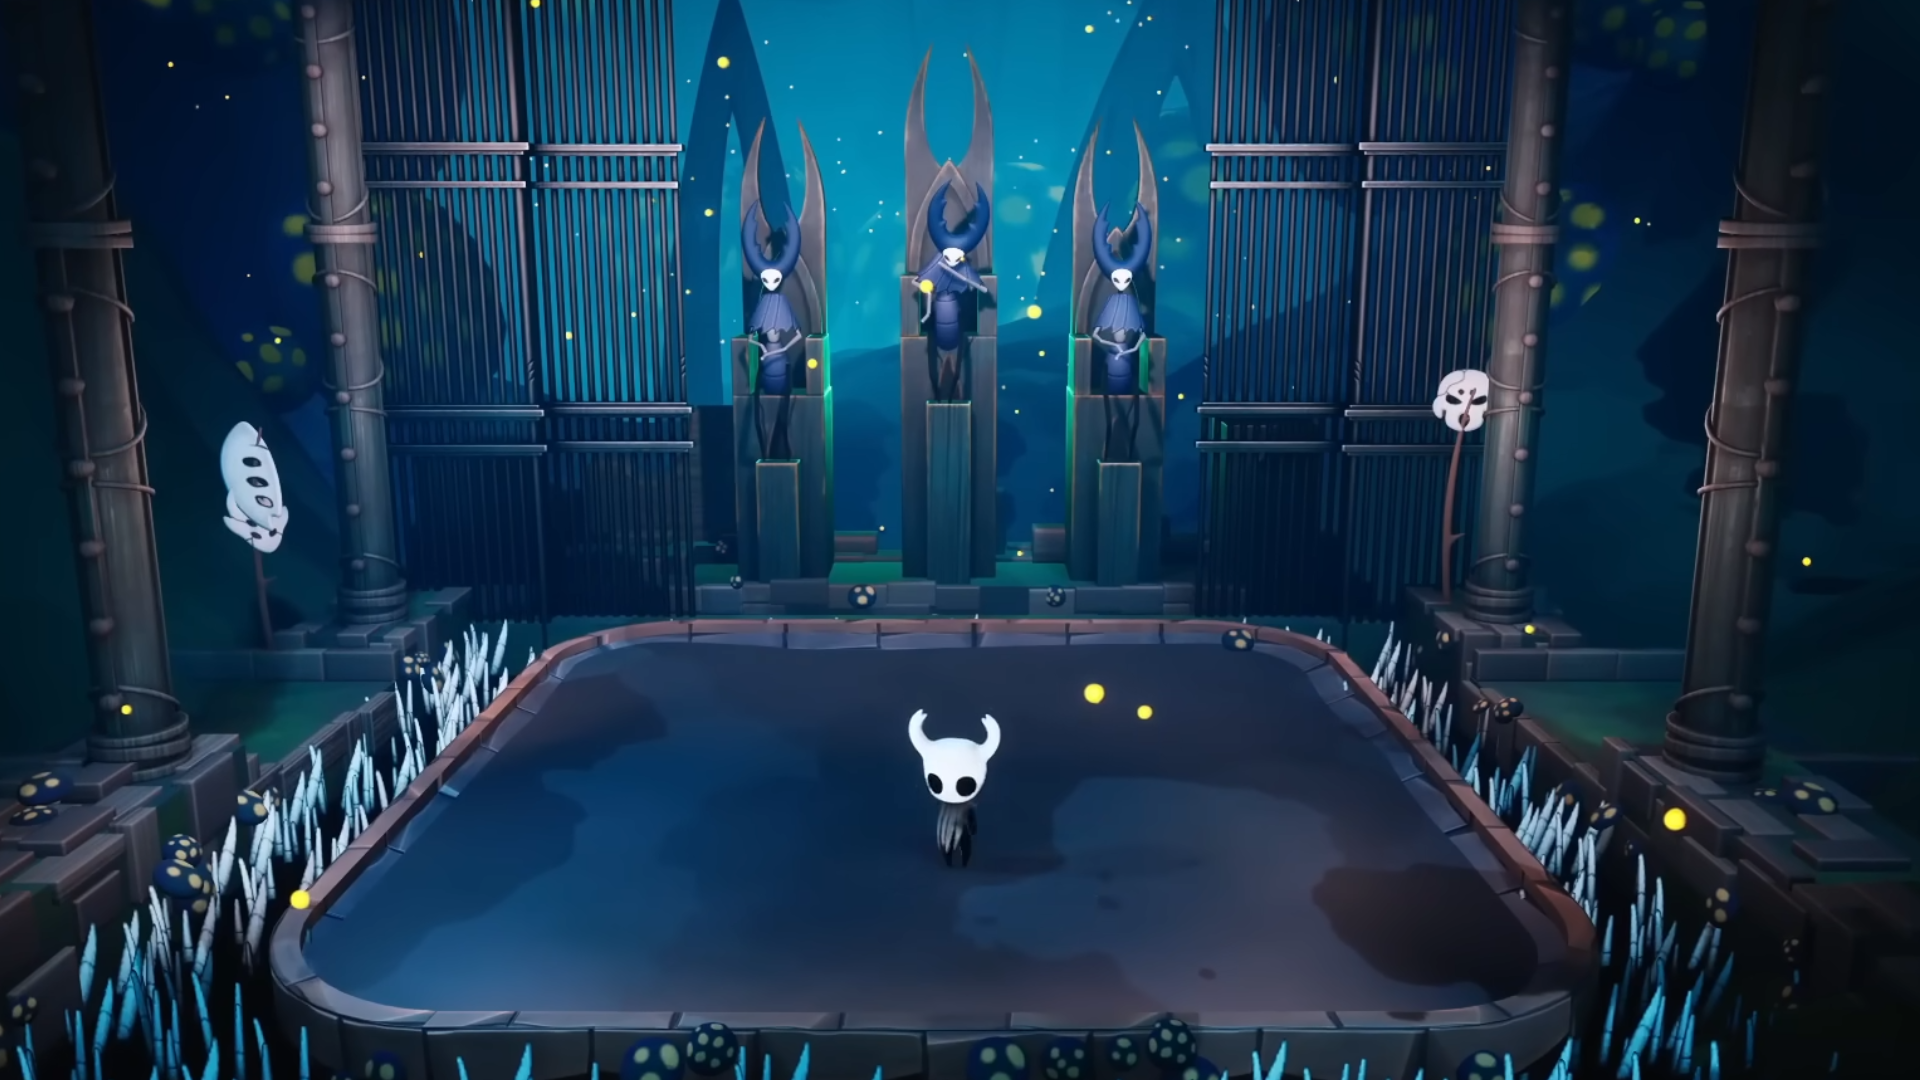 i-remade-hollow-knight-as-a-3d-game-6-33-screenshot-1-6329723